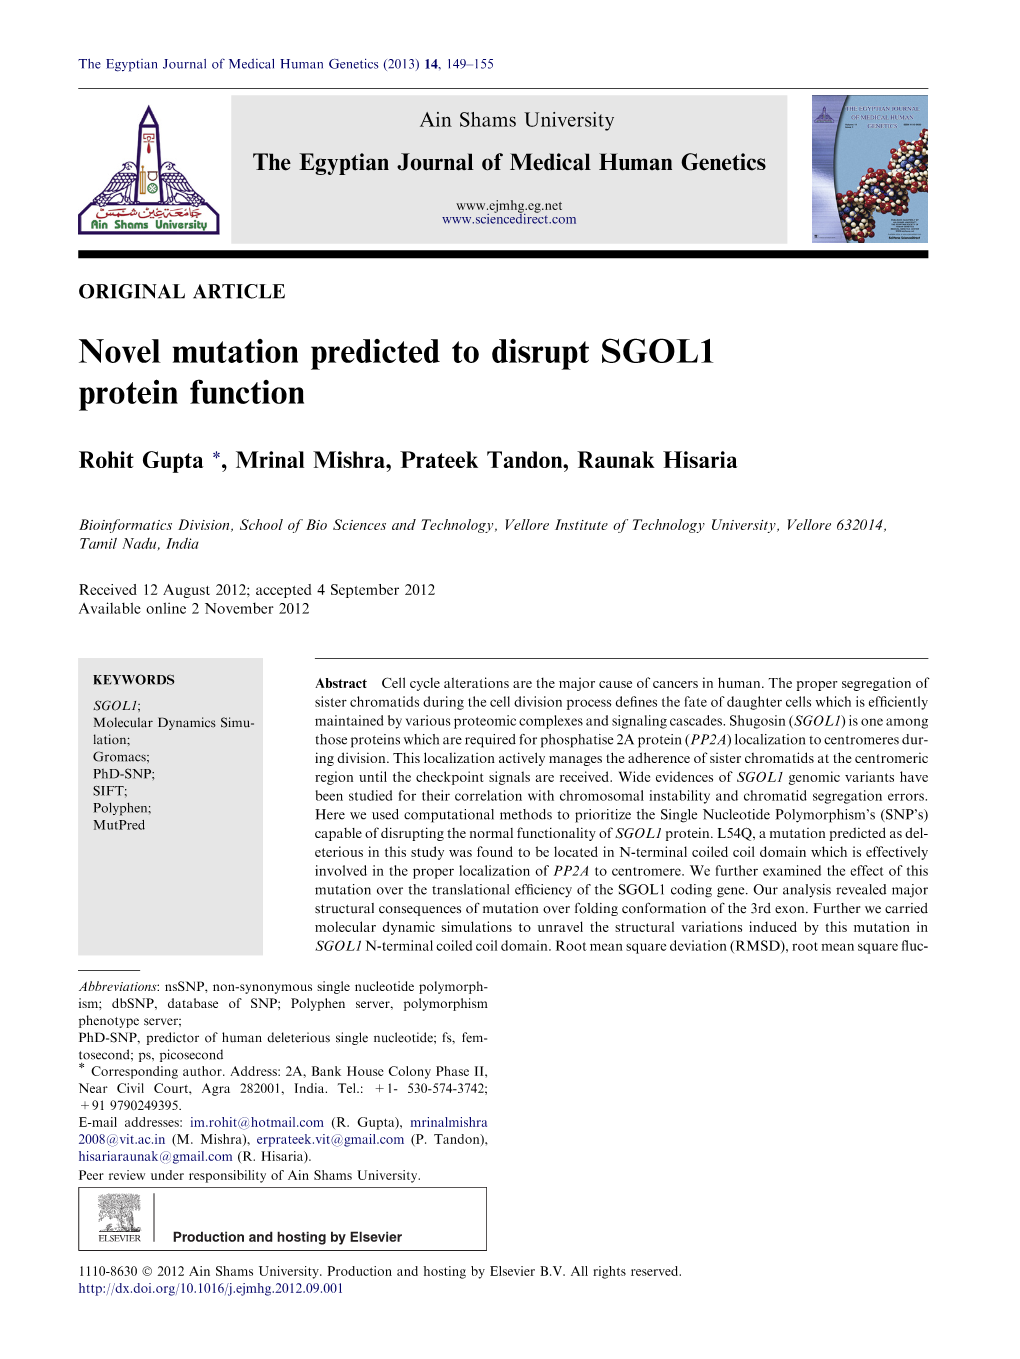 Novel Mutation Predicted to Disrupt SGOL1 Protein Function